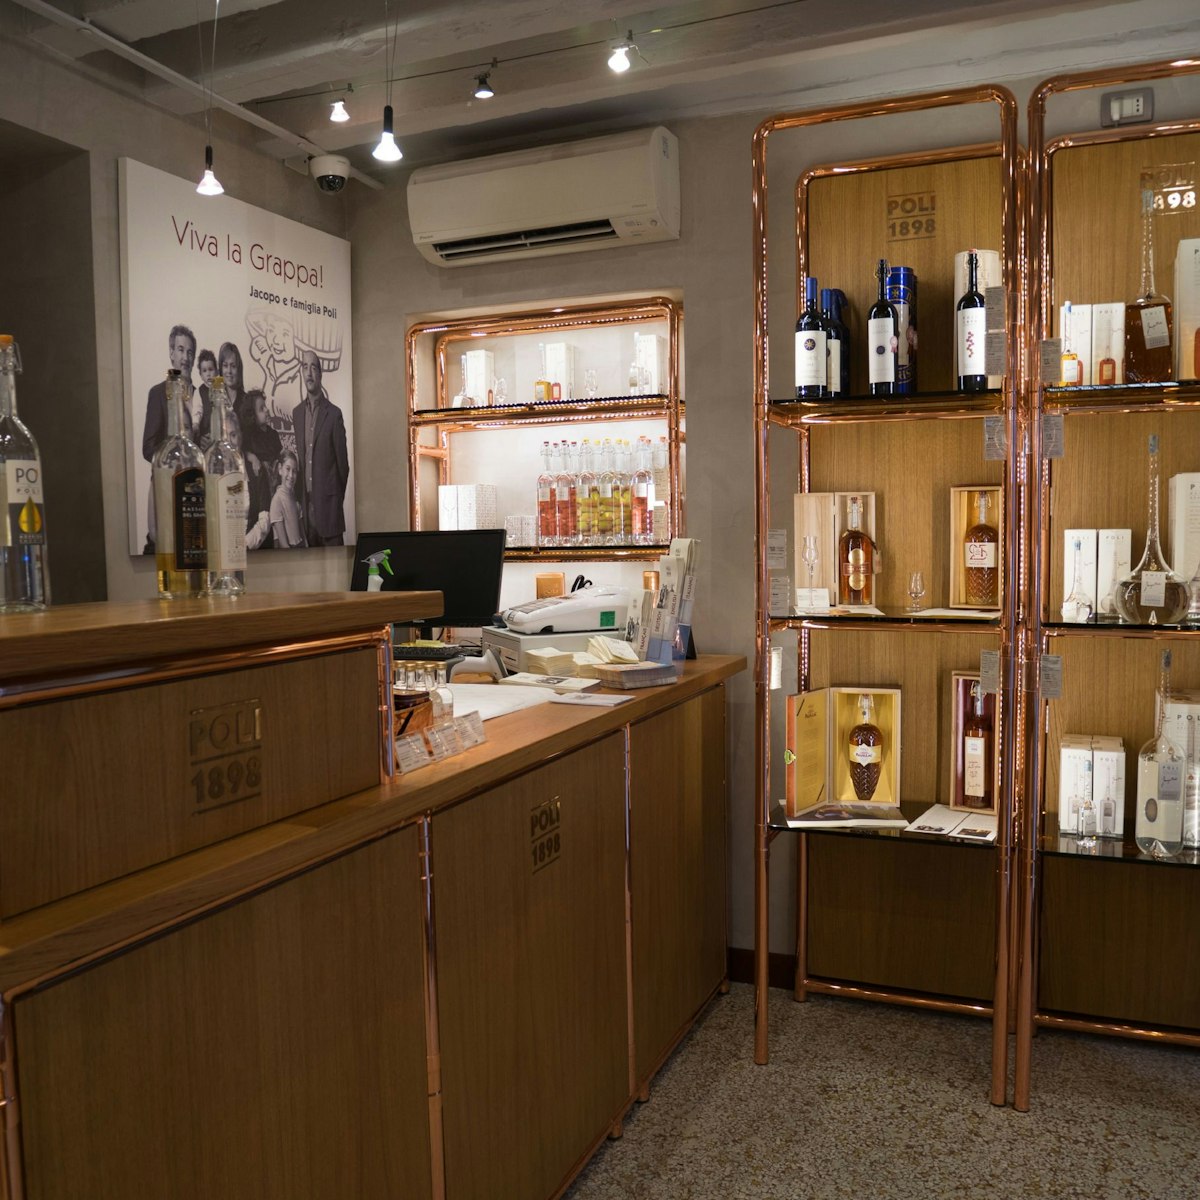 Poli Distillerie, bottles of grappa line the shelves of this charming shop